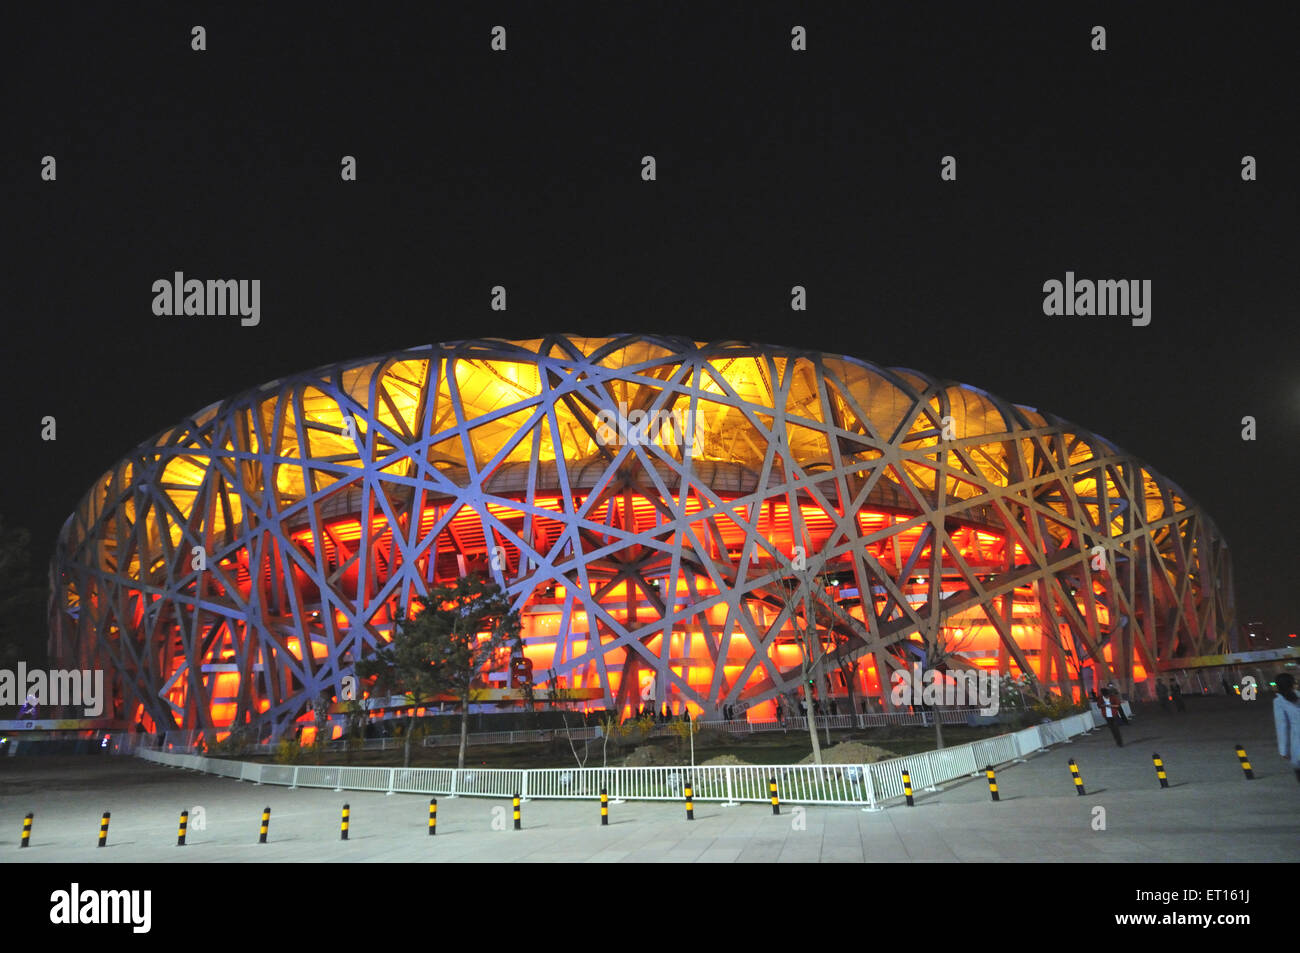 Stade national, stade olympique, stade Birds Nest, Chaoyang, Beijing, Chine, chinois Banque D'Images